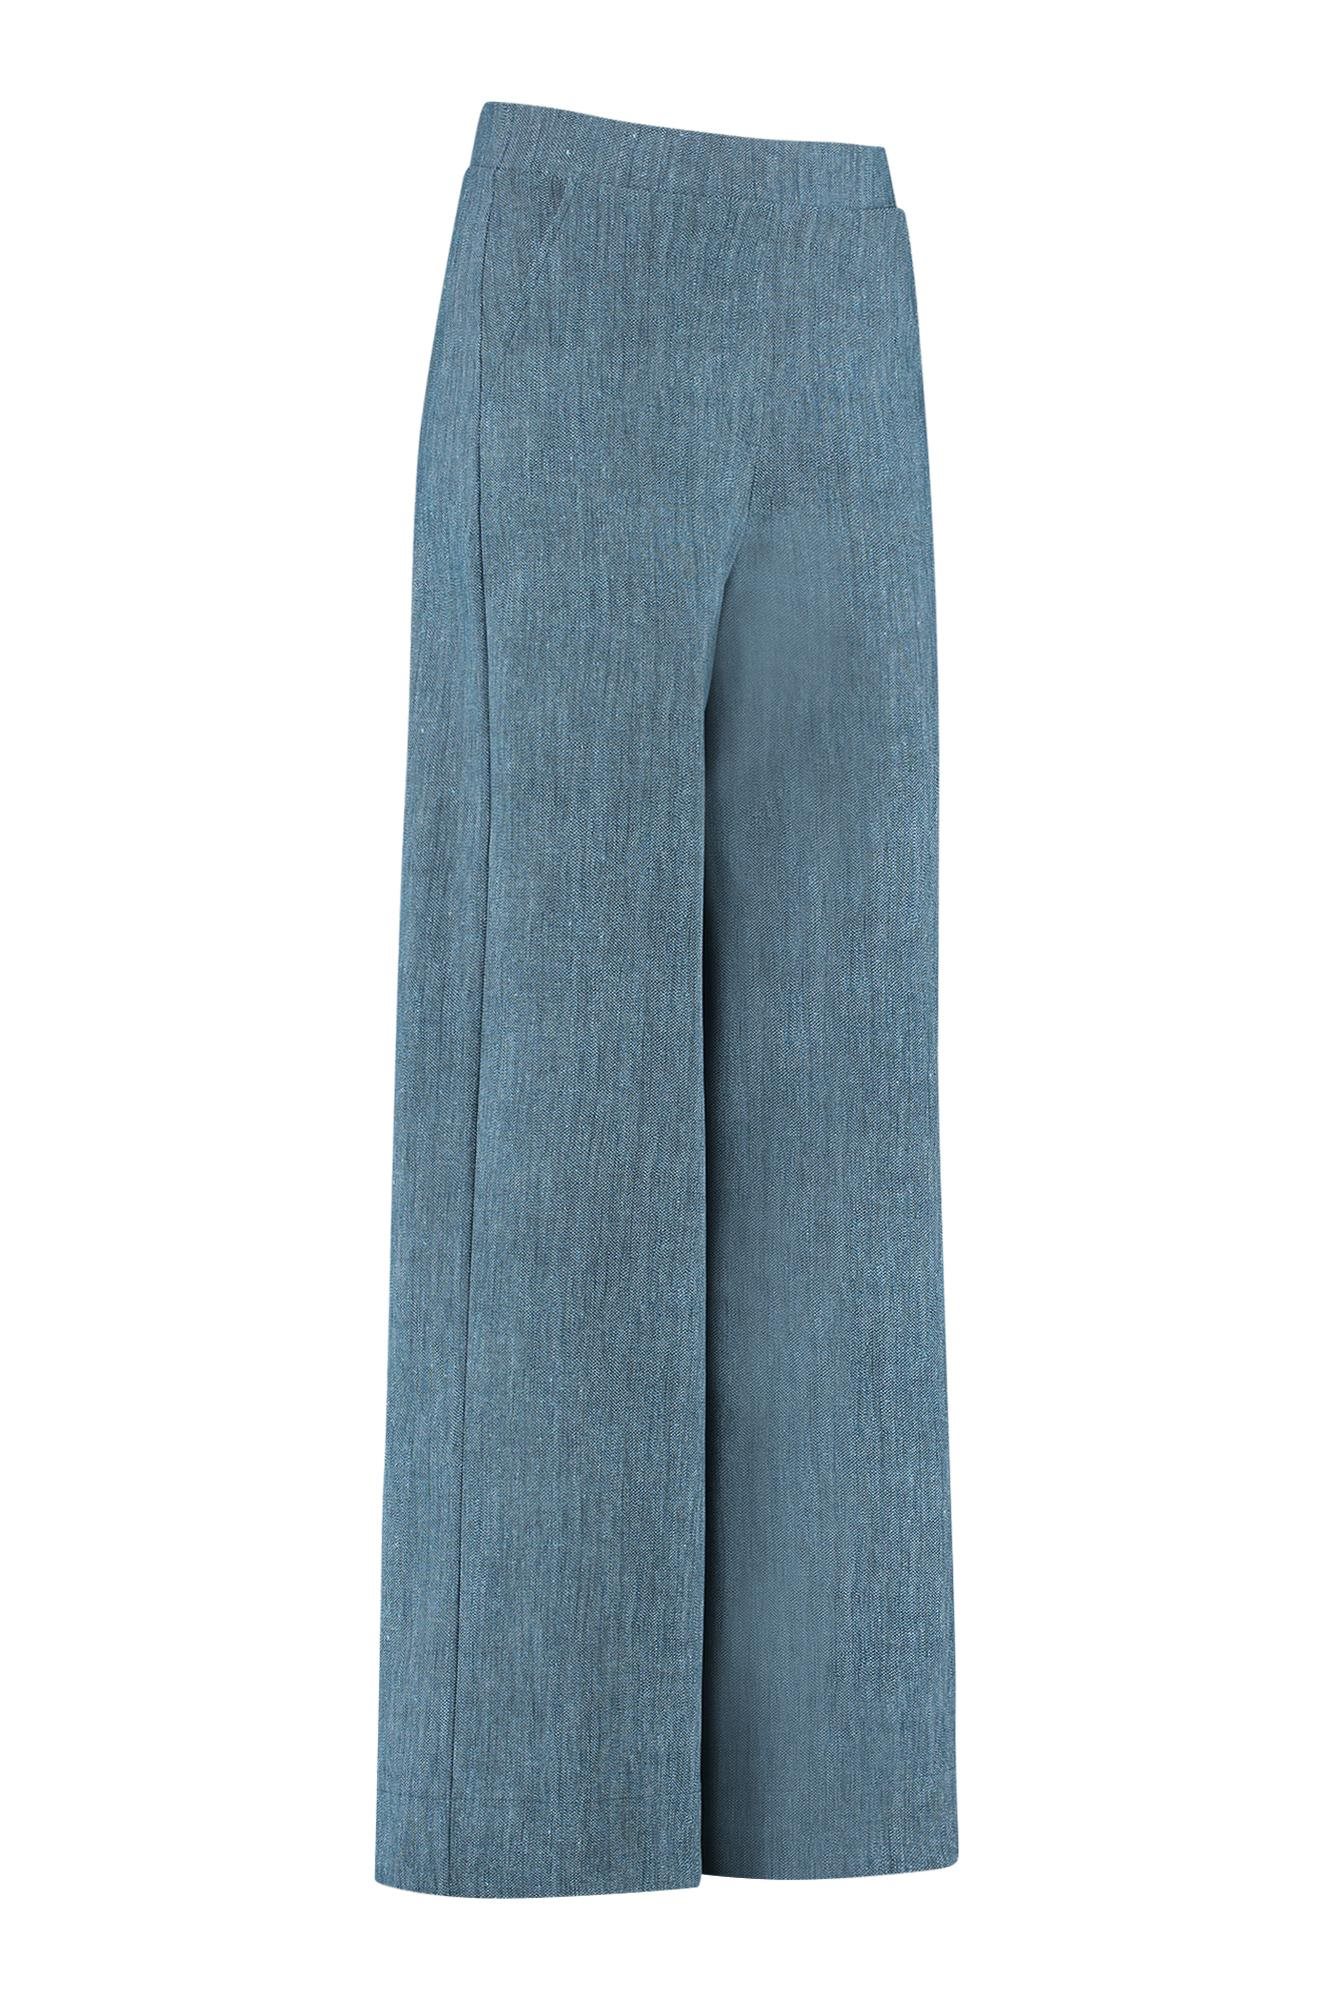 Lexis bnd jeans trousers